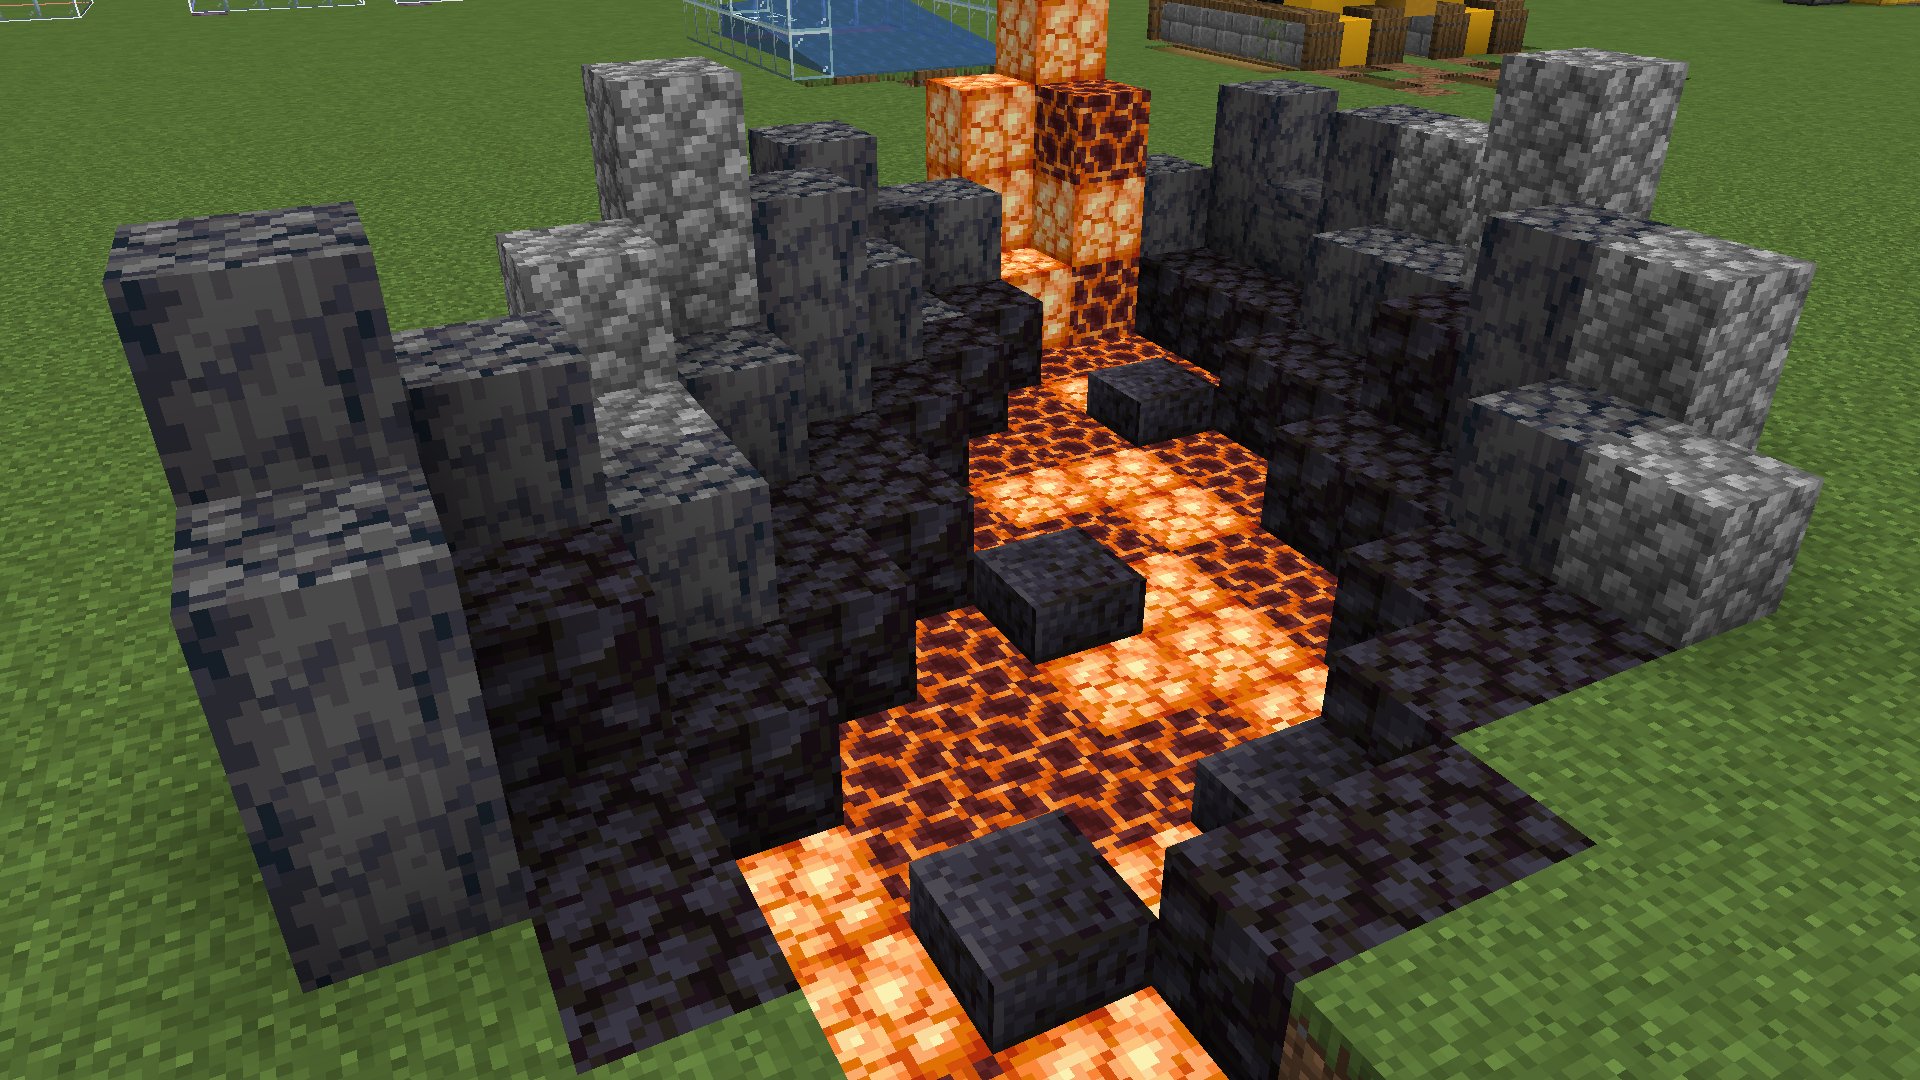 Pixlriffs Shroomlights Mix Well With Magma Blocks As A Fill In For Lava Flows When You Don T Want To Use Lava